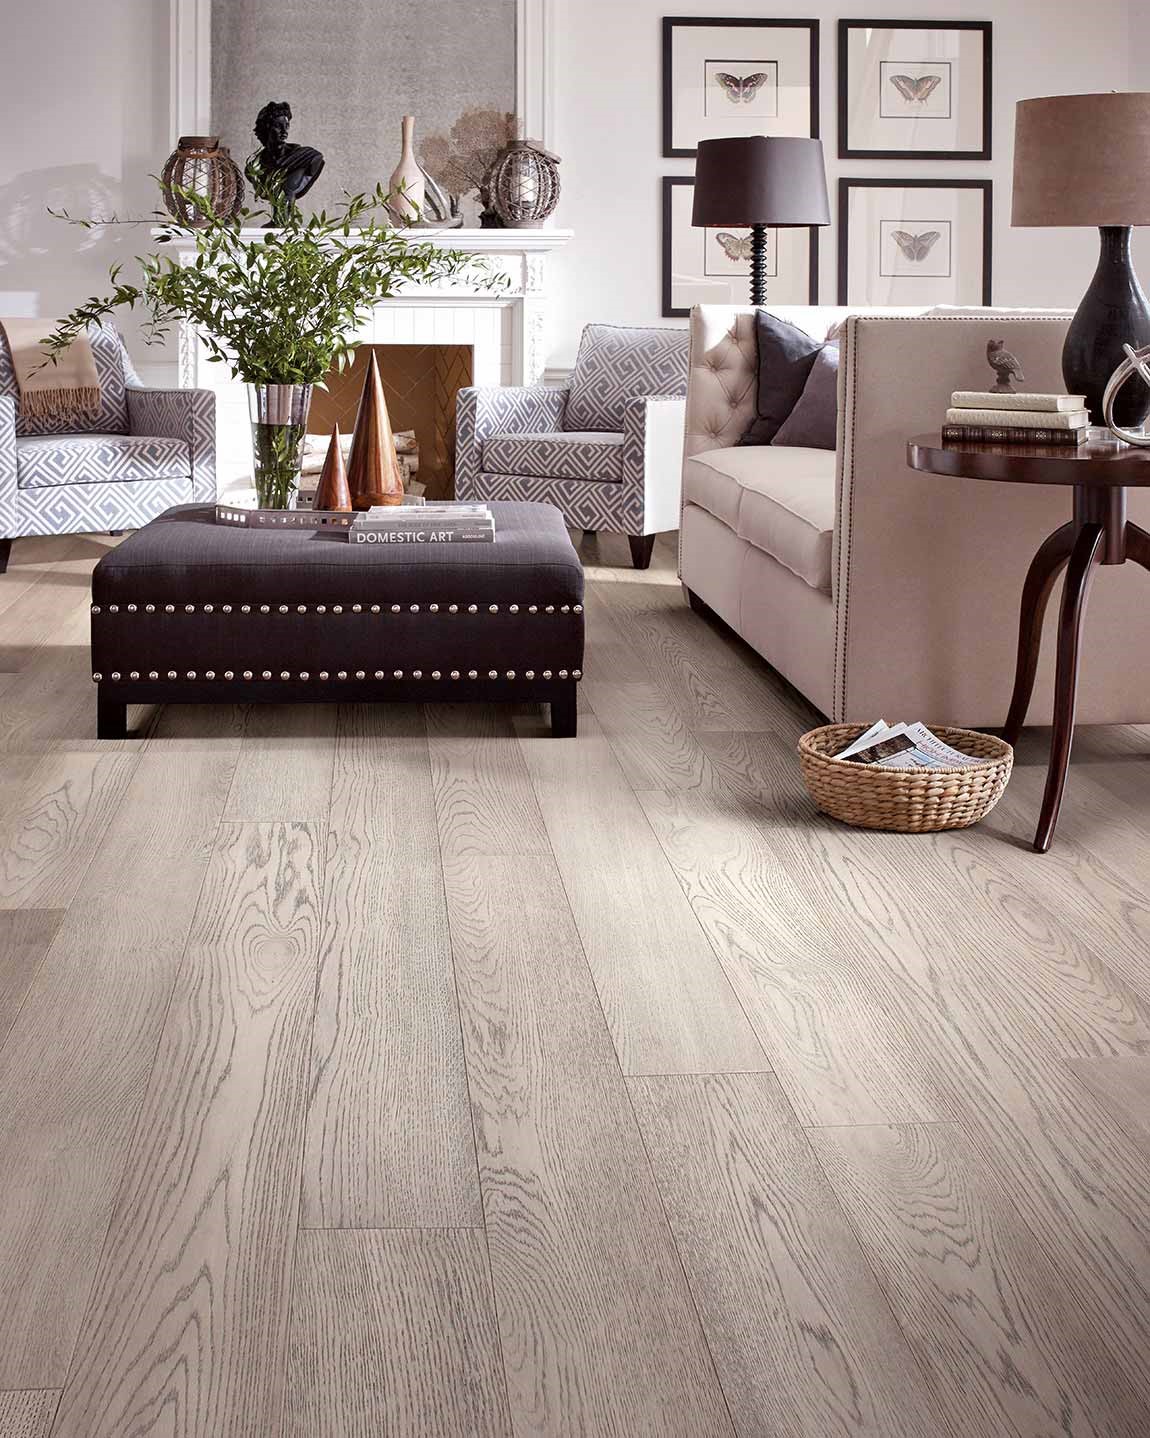 wire brushed light colored flooring in classically styled living room